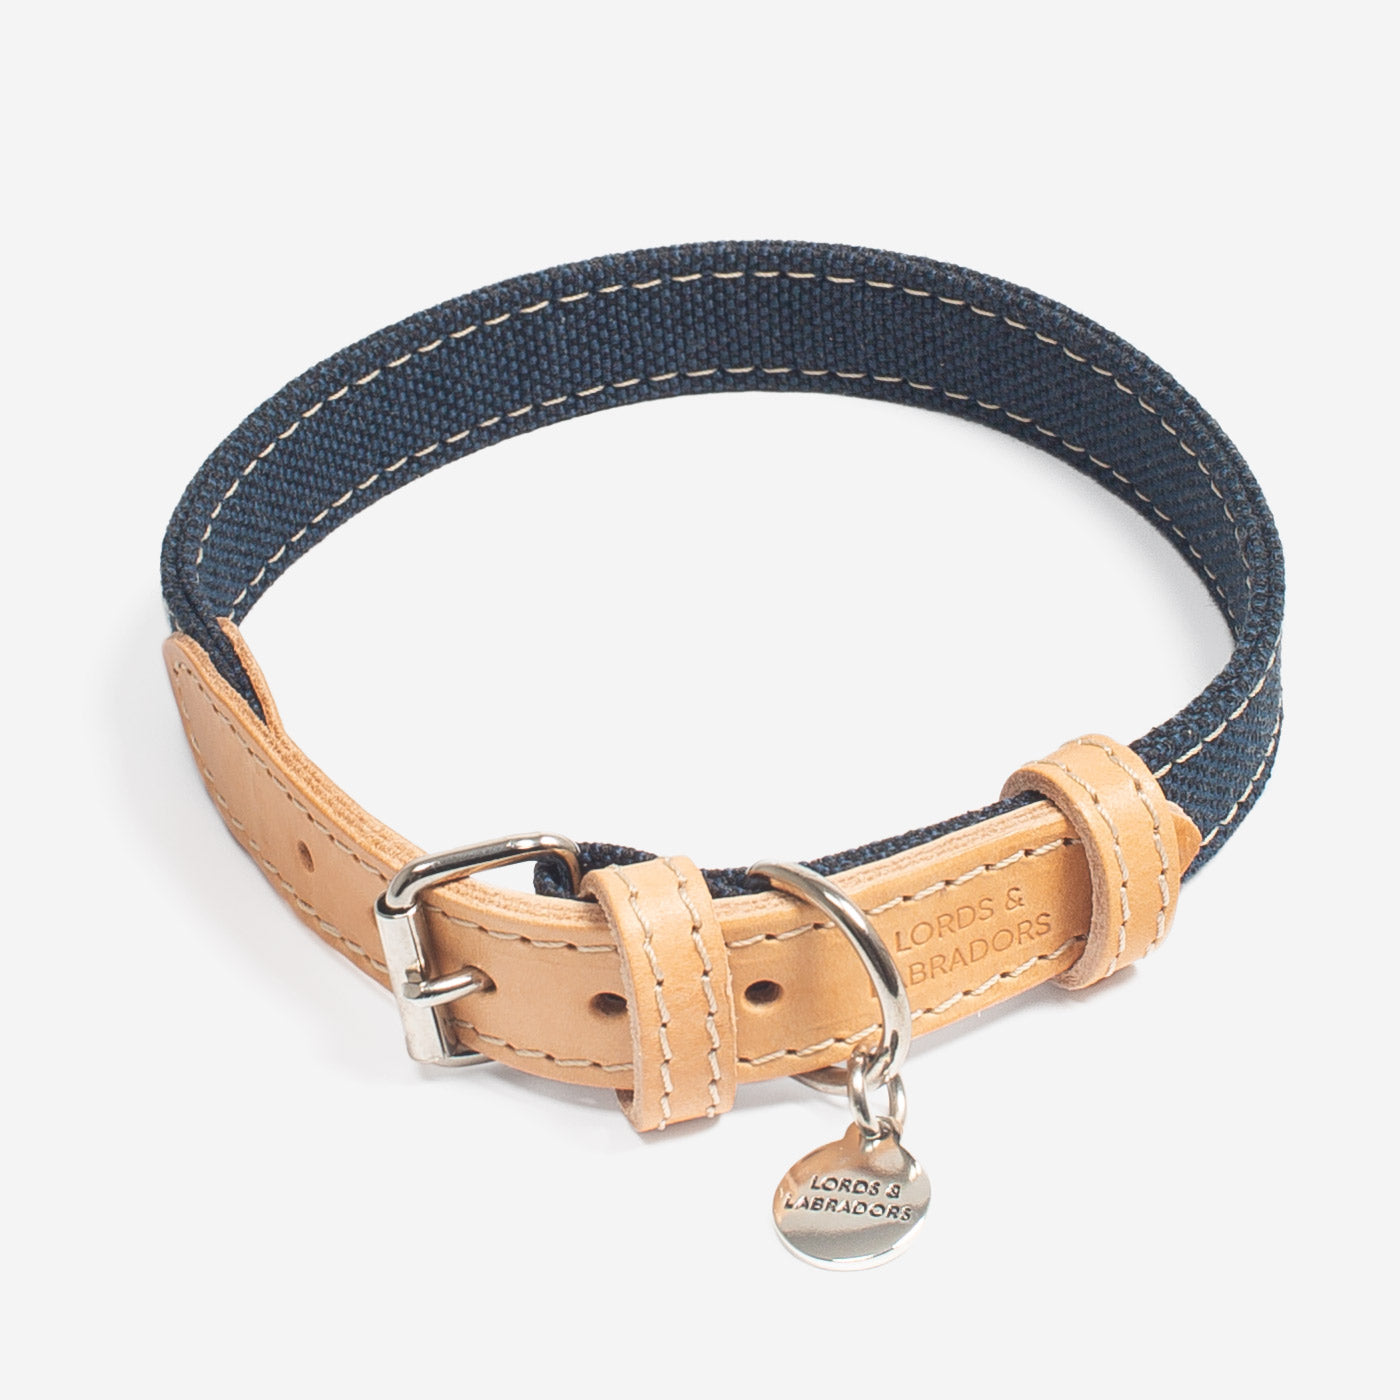 Discover dog walking luxury with our handcrafted Italian dog collar in beautiful essentials twill navy denim with denim blue fabric! The perfect collar for dogs available now at Lords & Labradors    